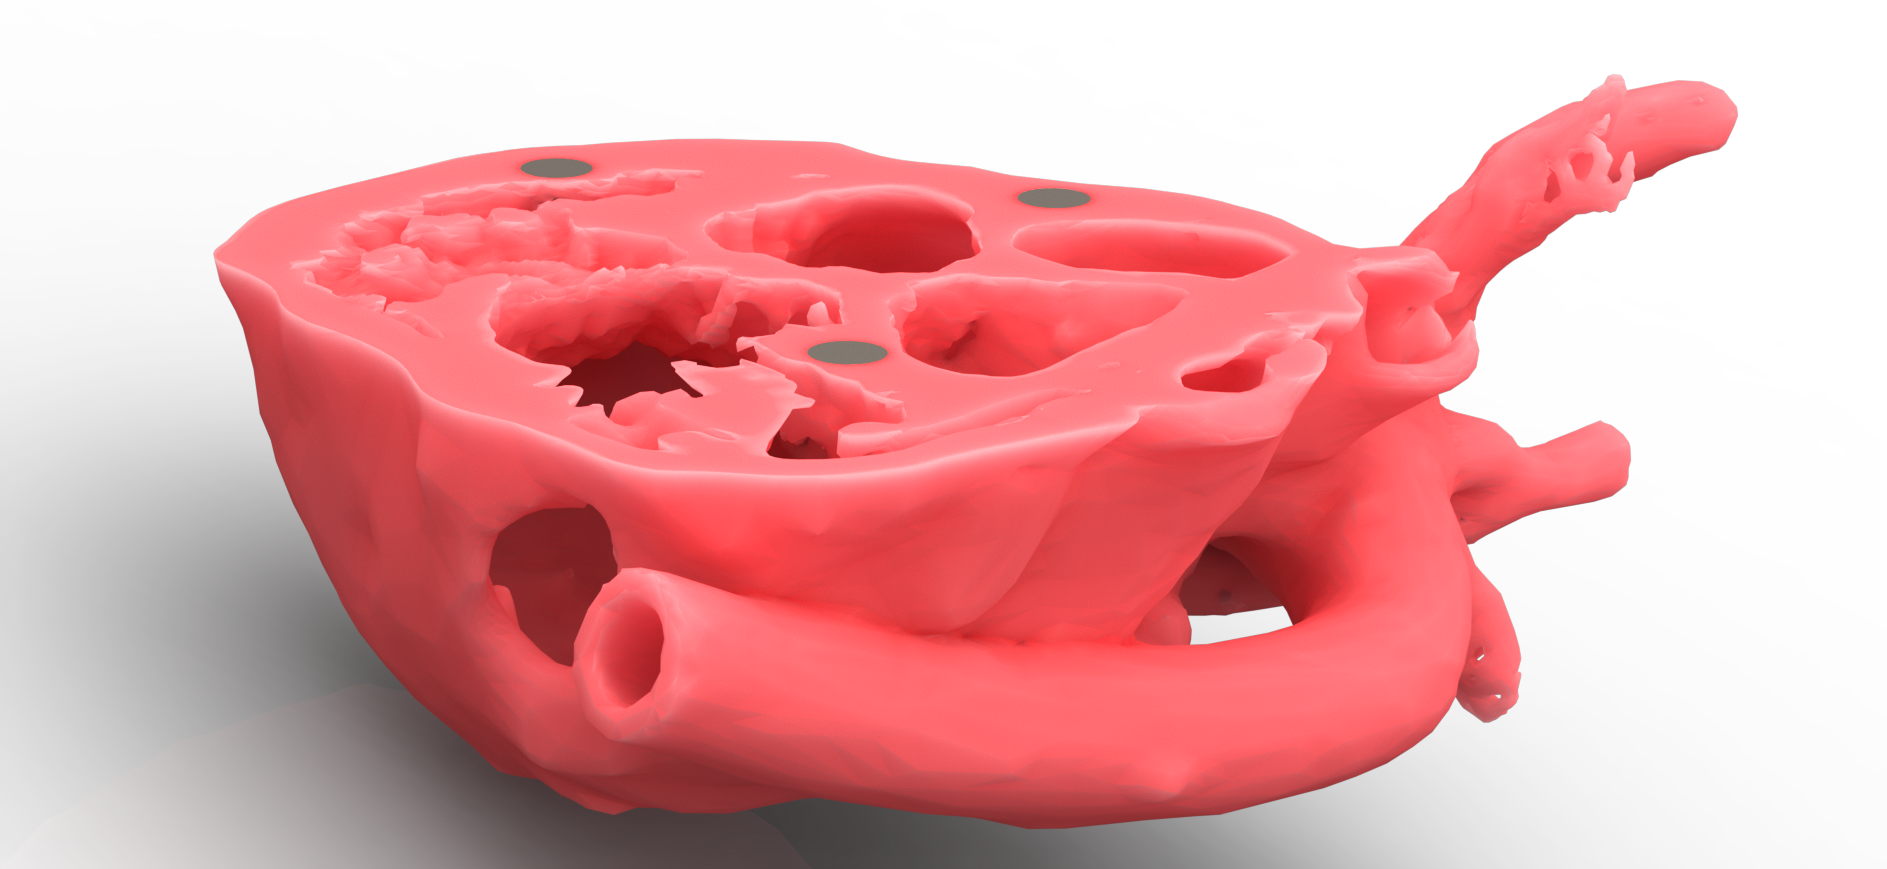 3D Printed Heart Section 3 of 3